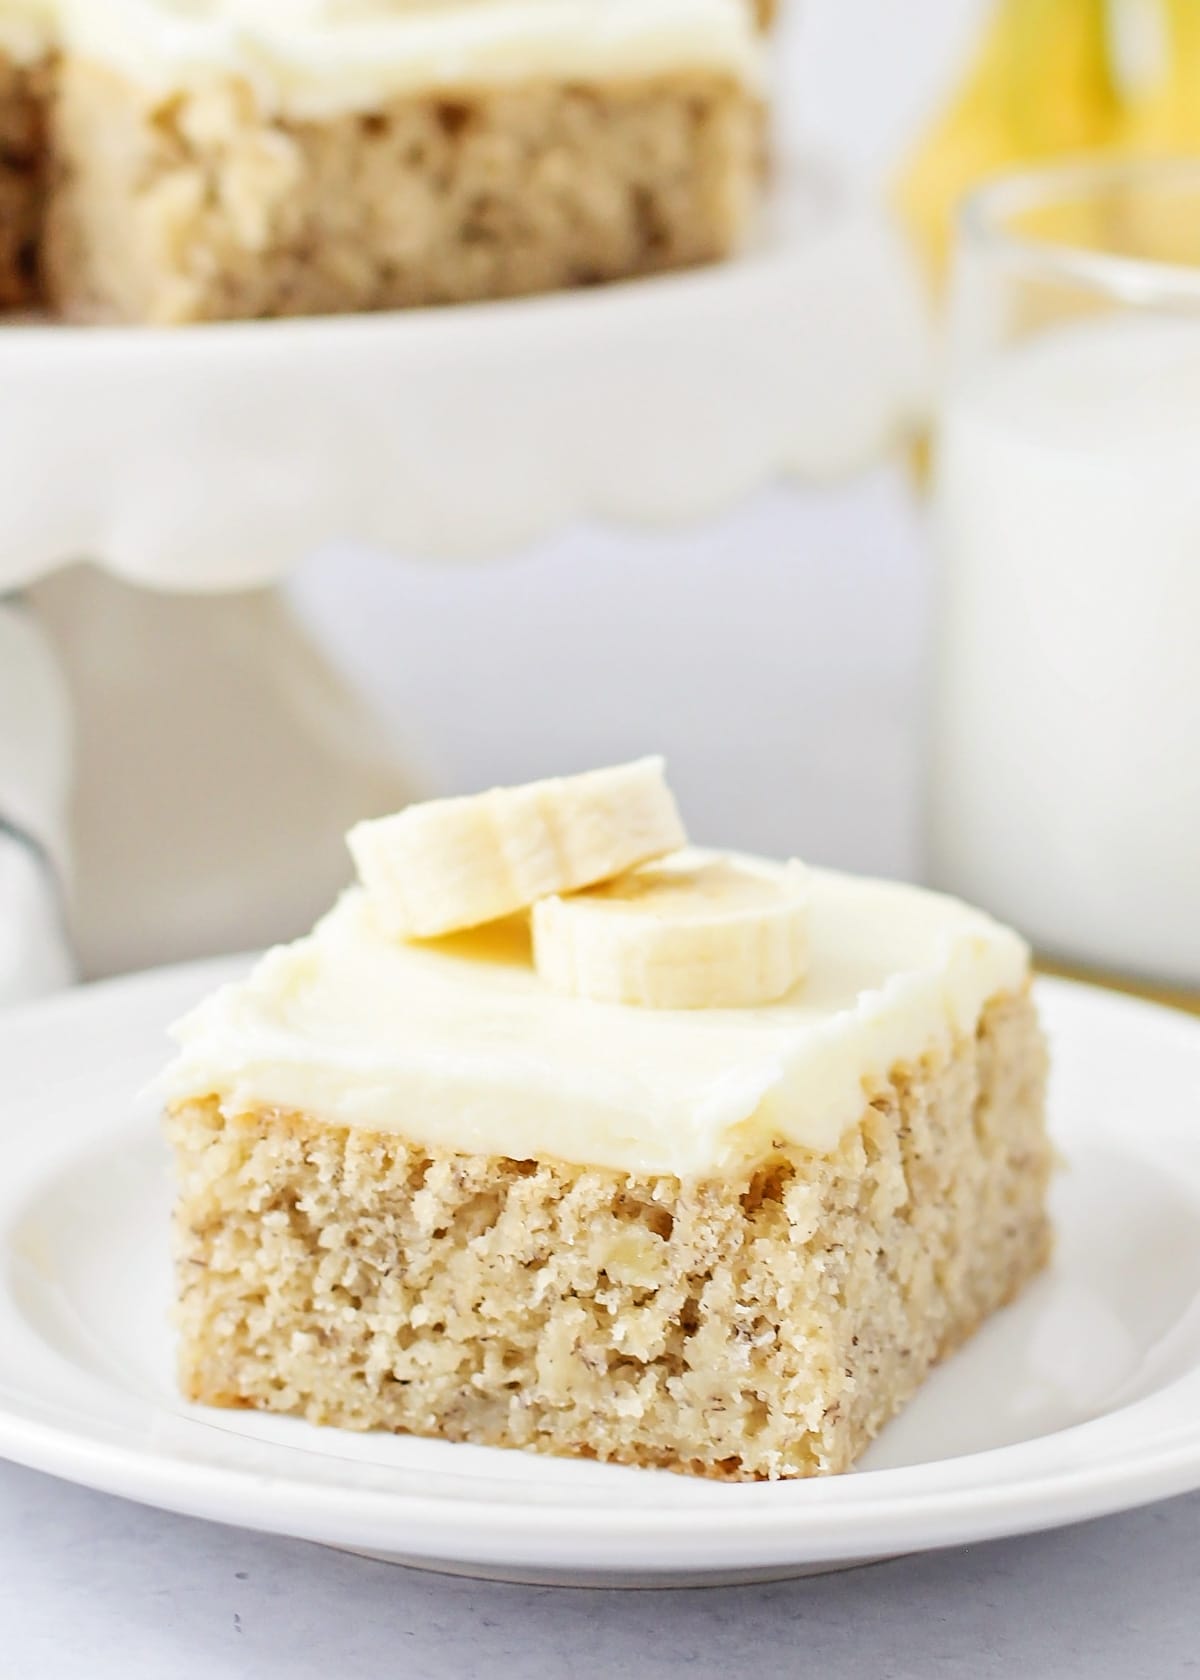 Banana bars slice topped with cream cheese frosting and sliced banana.